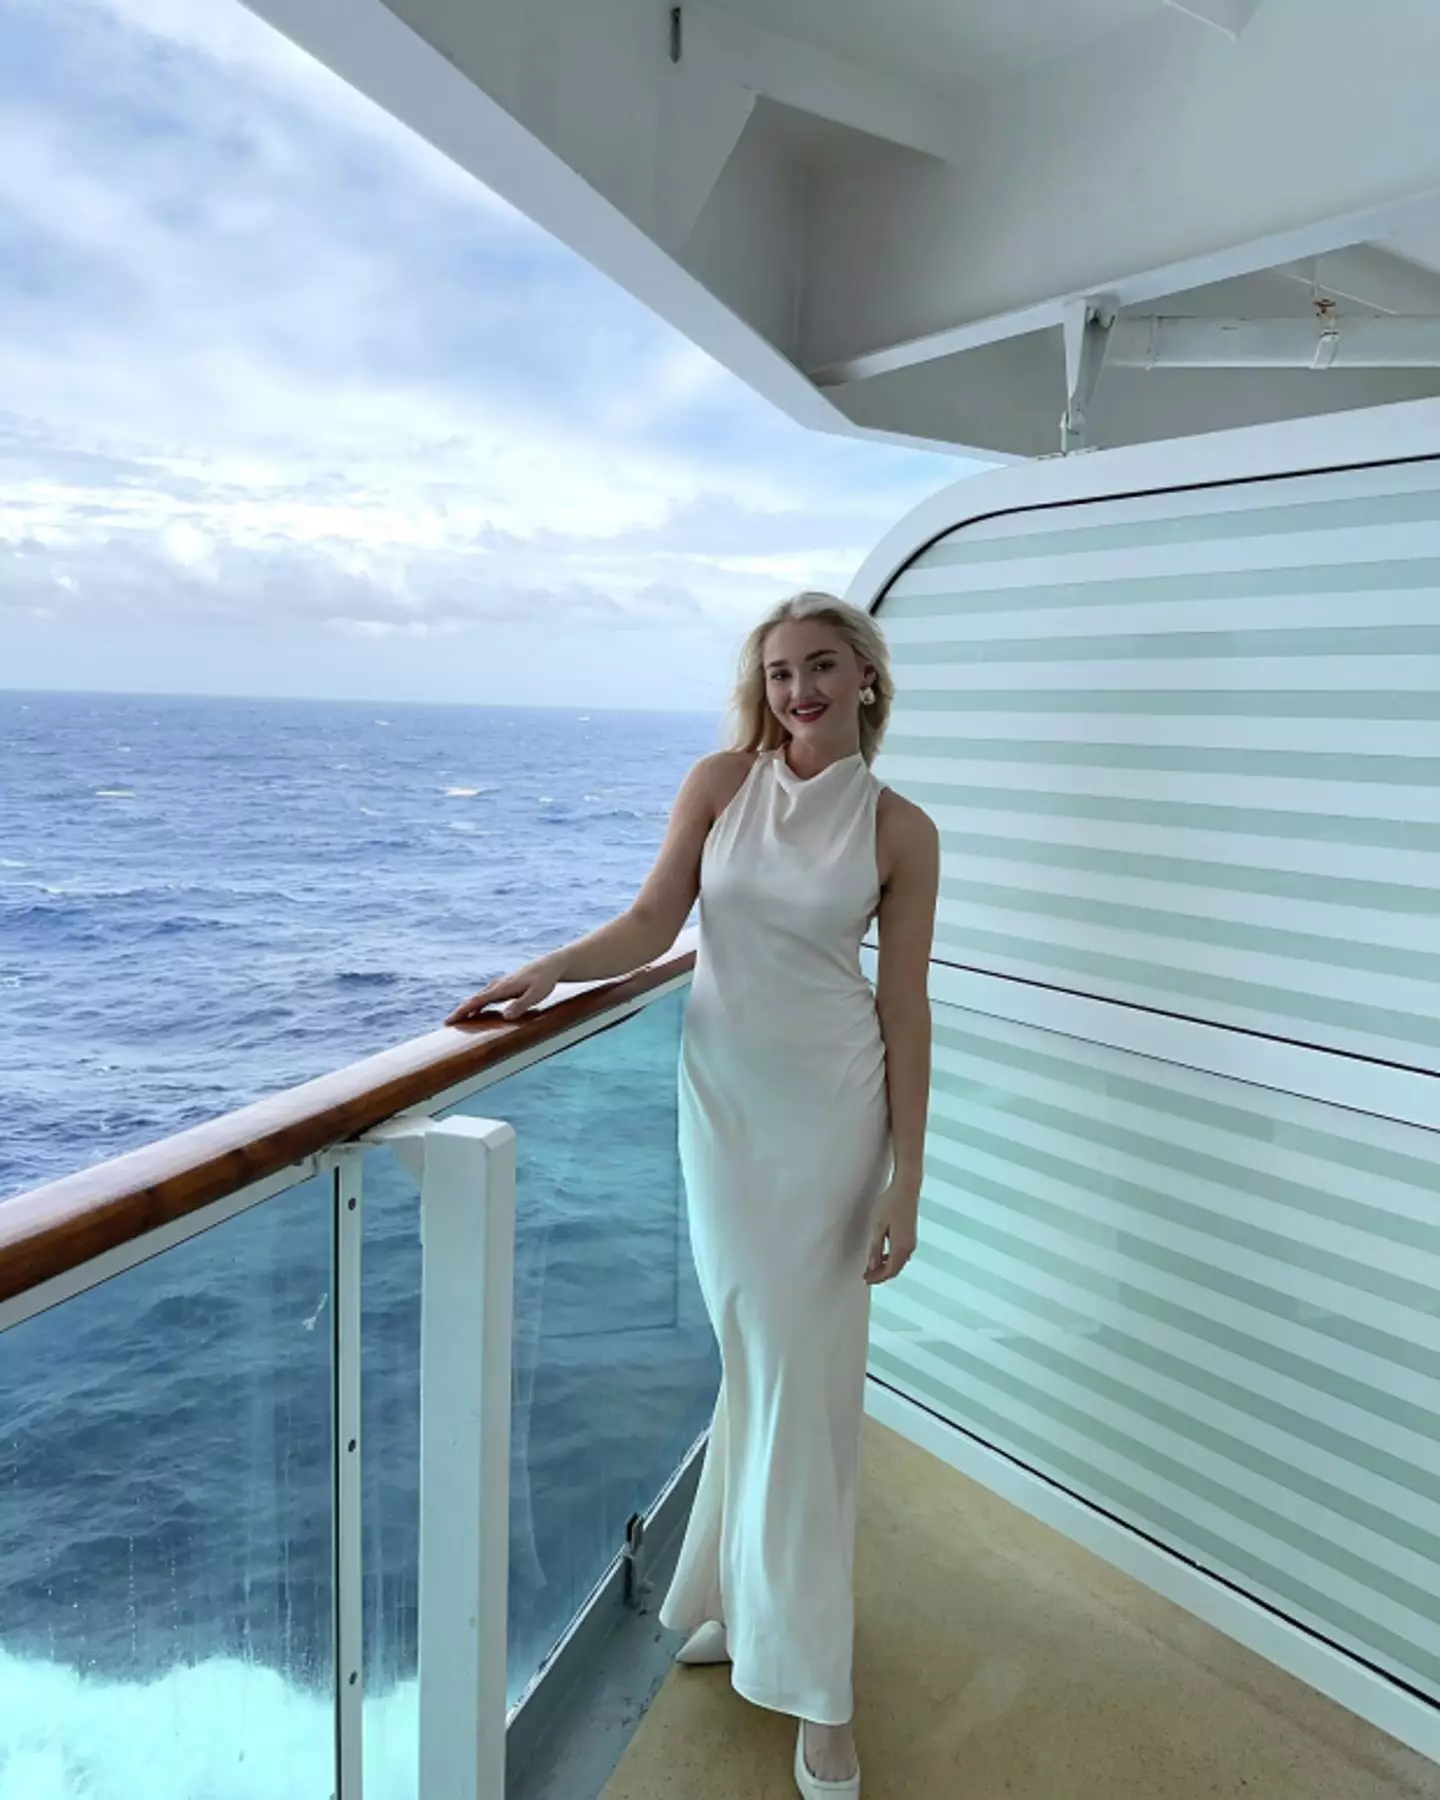 The 26-year-old is onboard Royal Caribbean's Ultimate World Cruise.